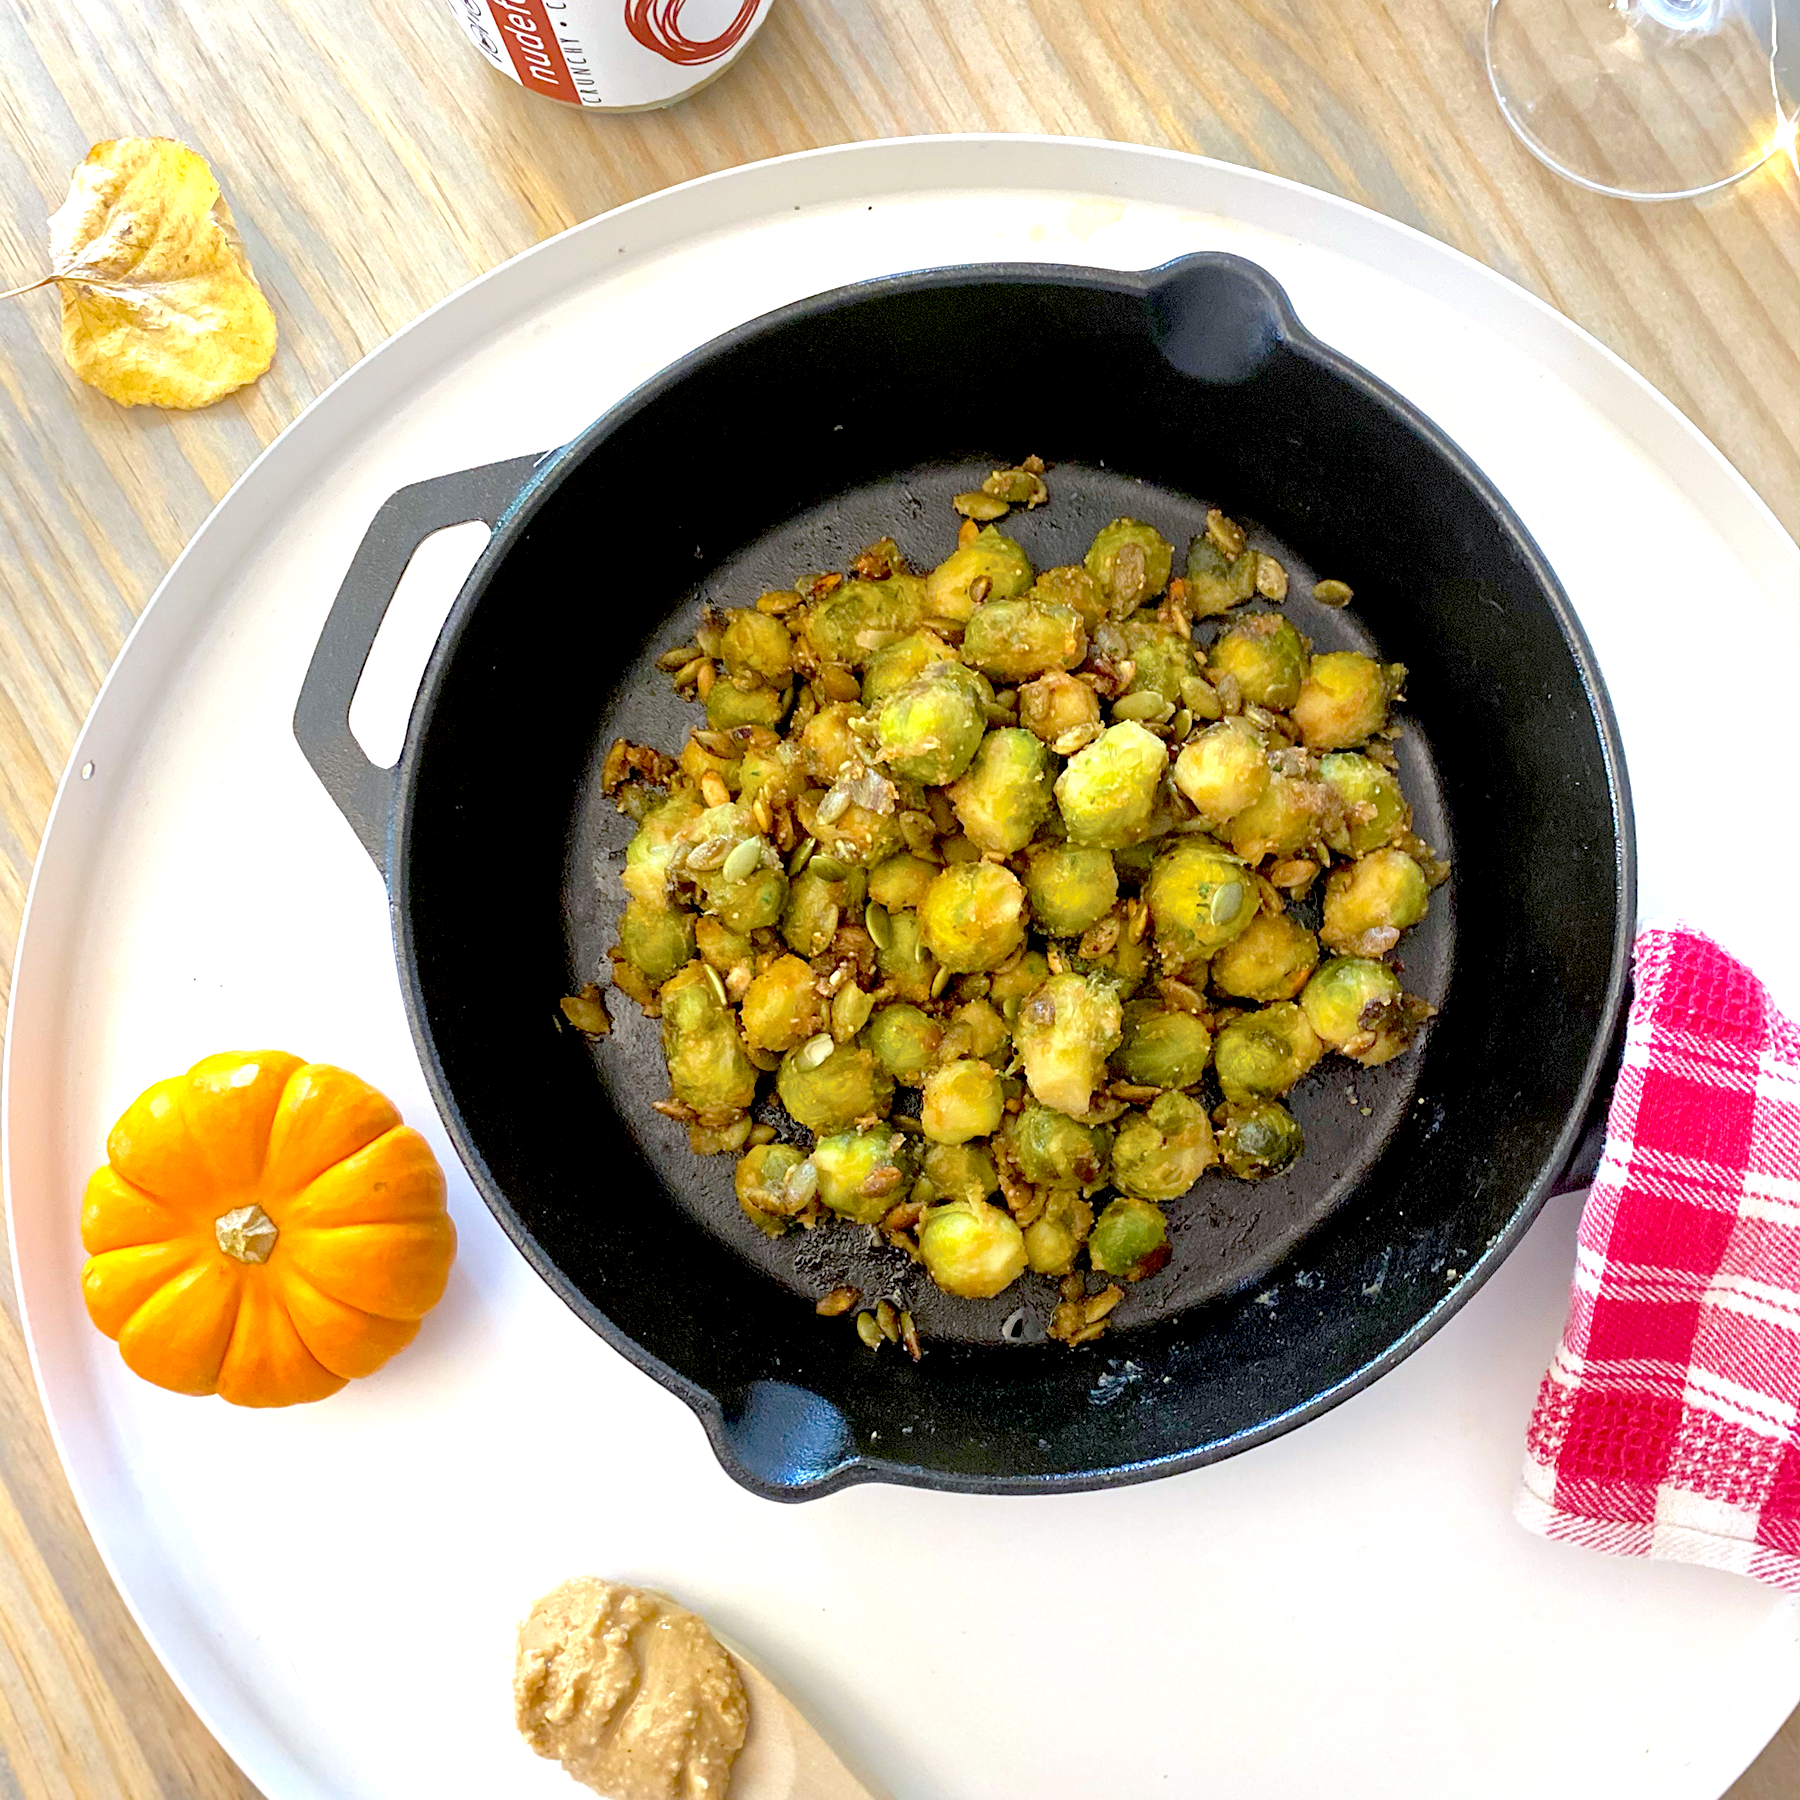 Maple Peanut Brussel Sprouts with Roasted Pumpkin Seeds